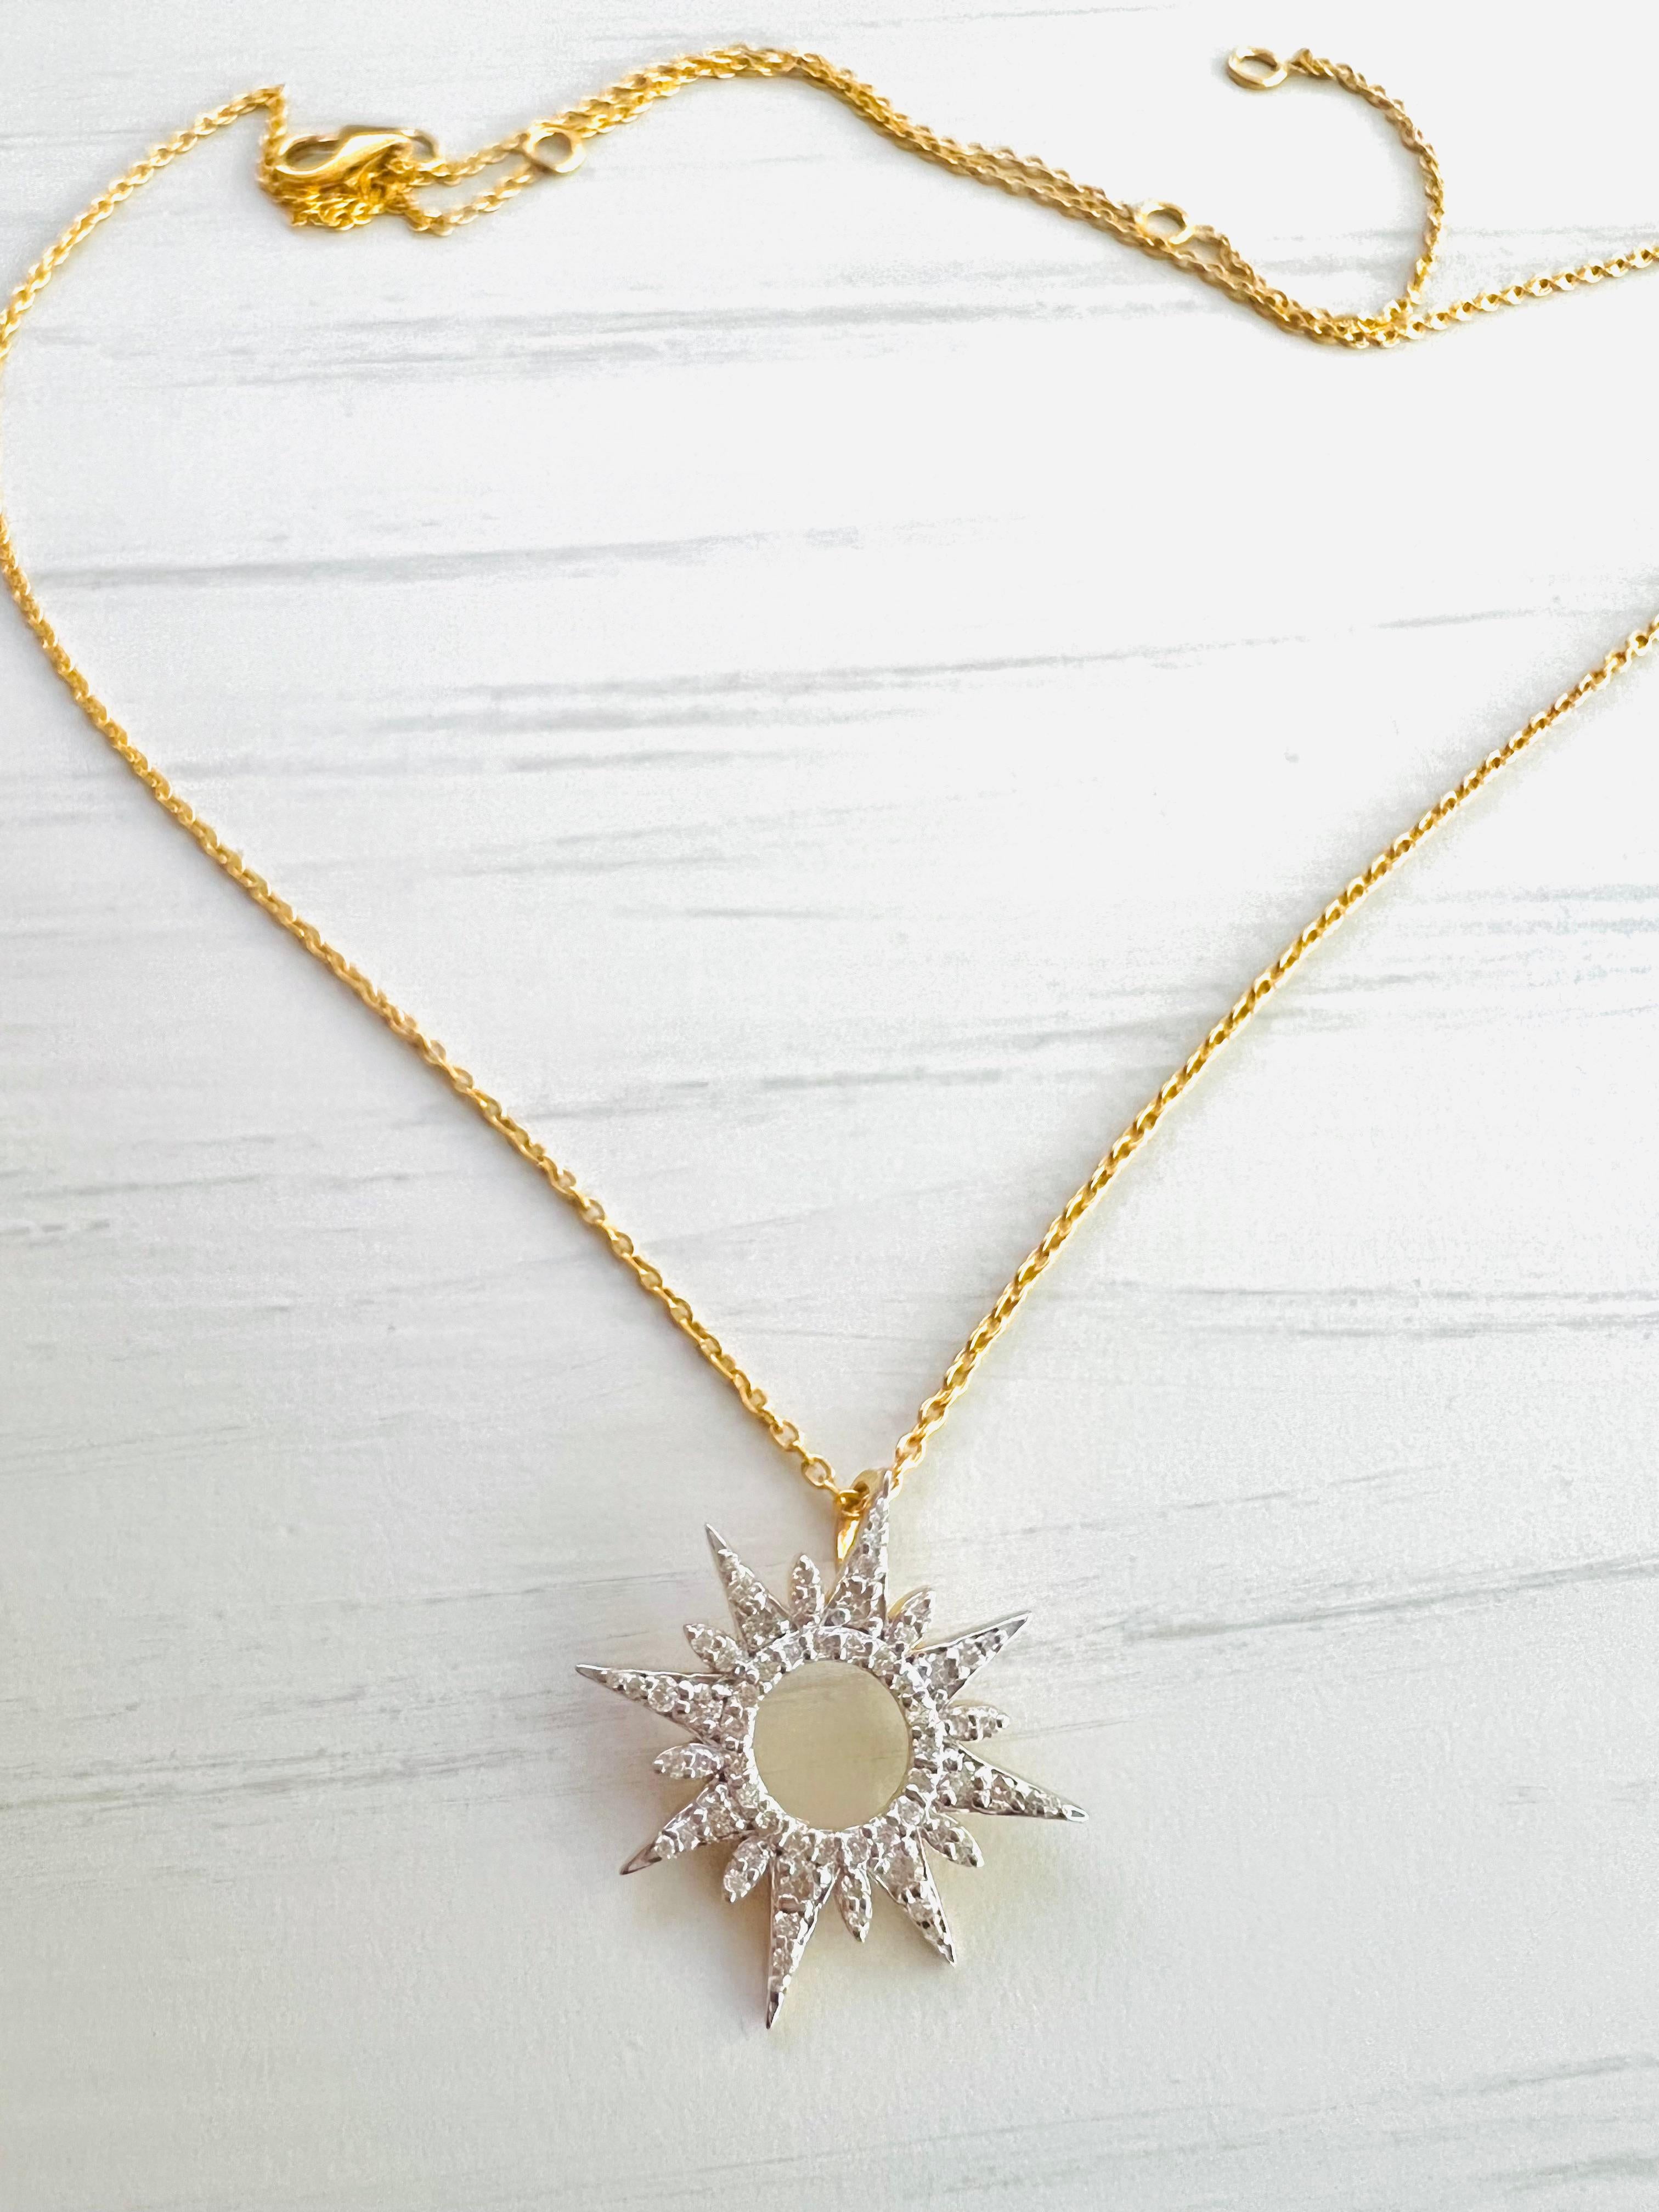 This splendid and captivating sun burst diamond necklace is set with brilliant diamonds in 18k yellow gold. Earrings shown in the pictures are not included and are sold separately. The necklace is 18